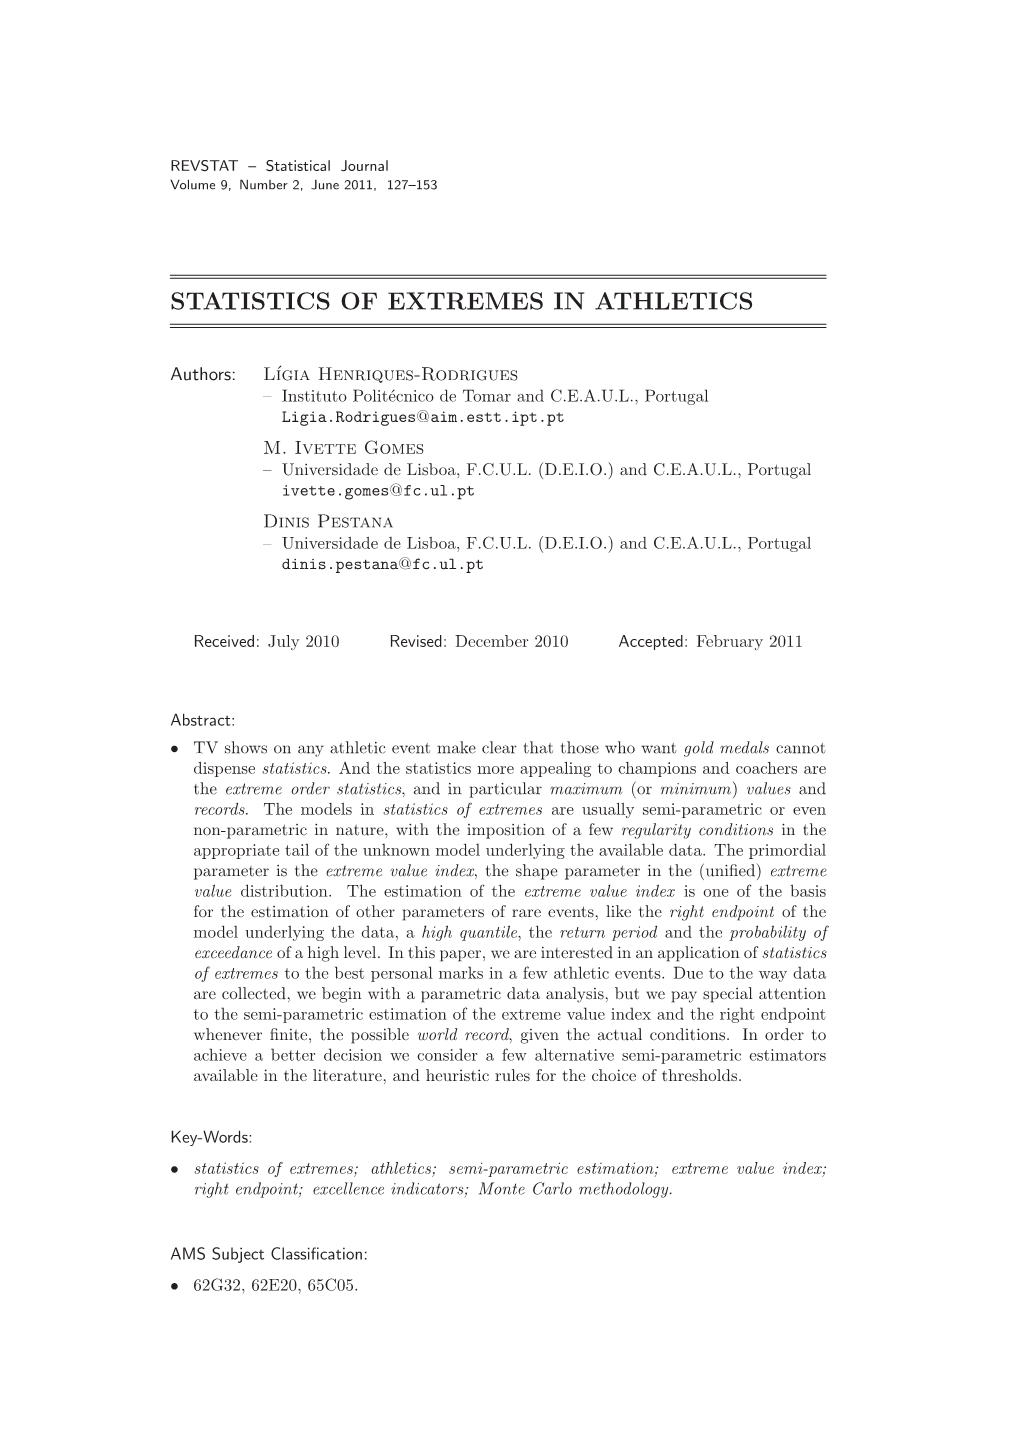 Statistics of Extremes in Athletics